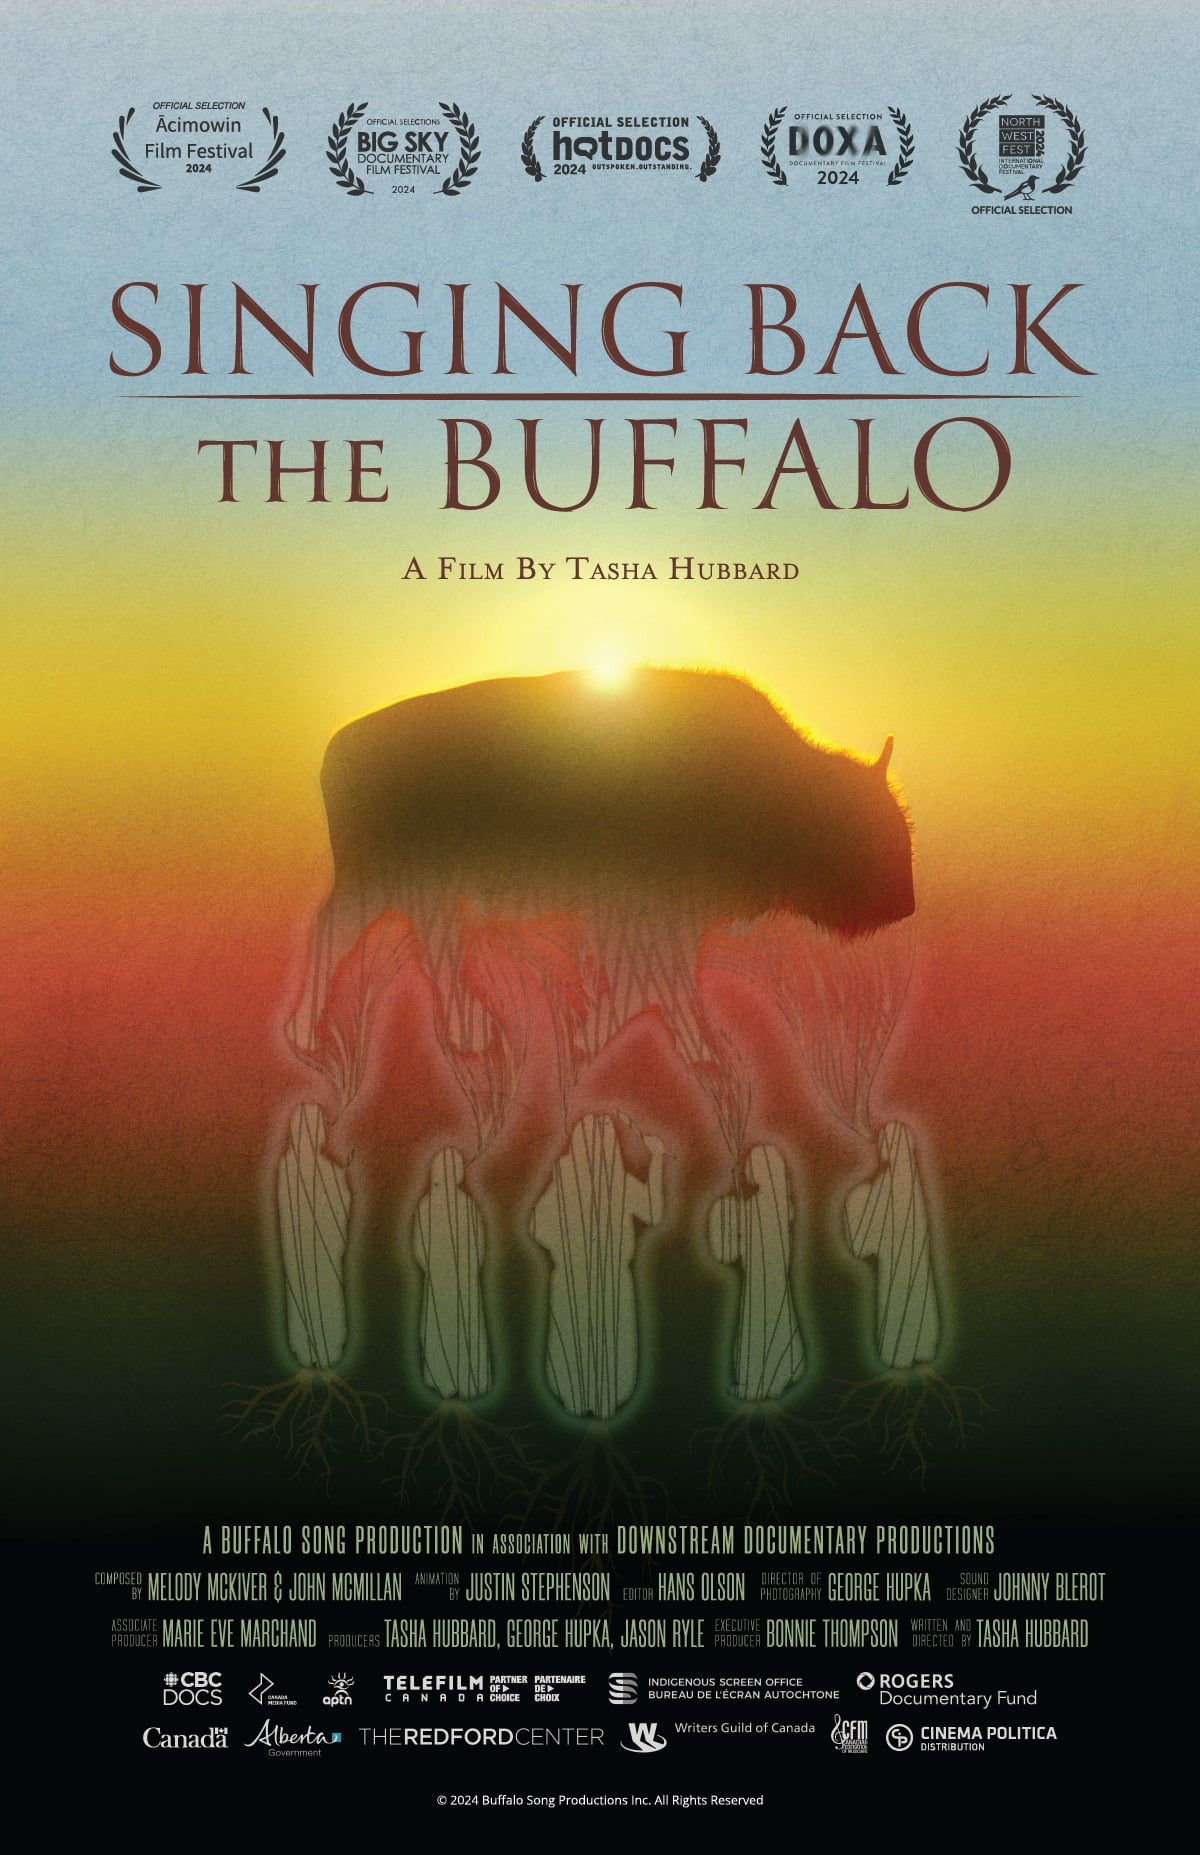 Official film poster for Singing Back the Buffalo